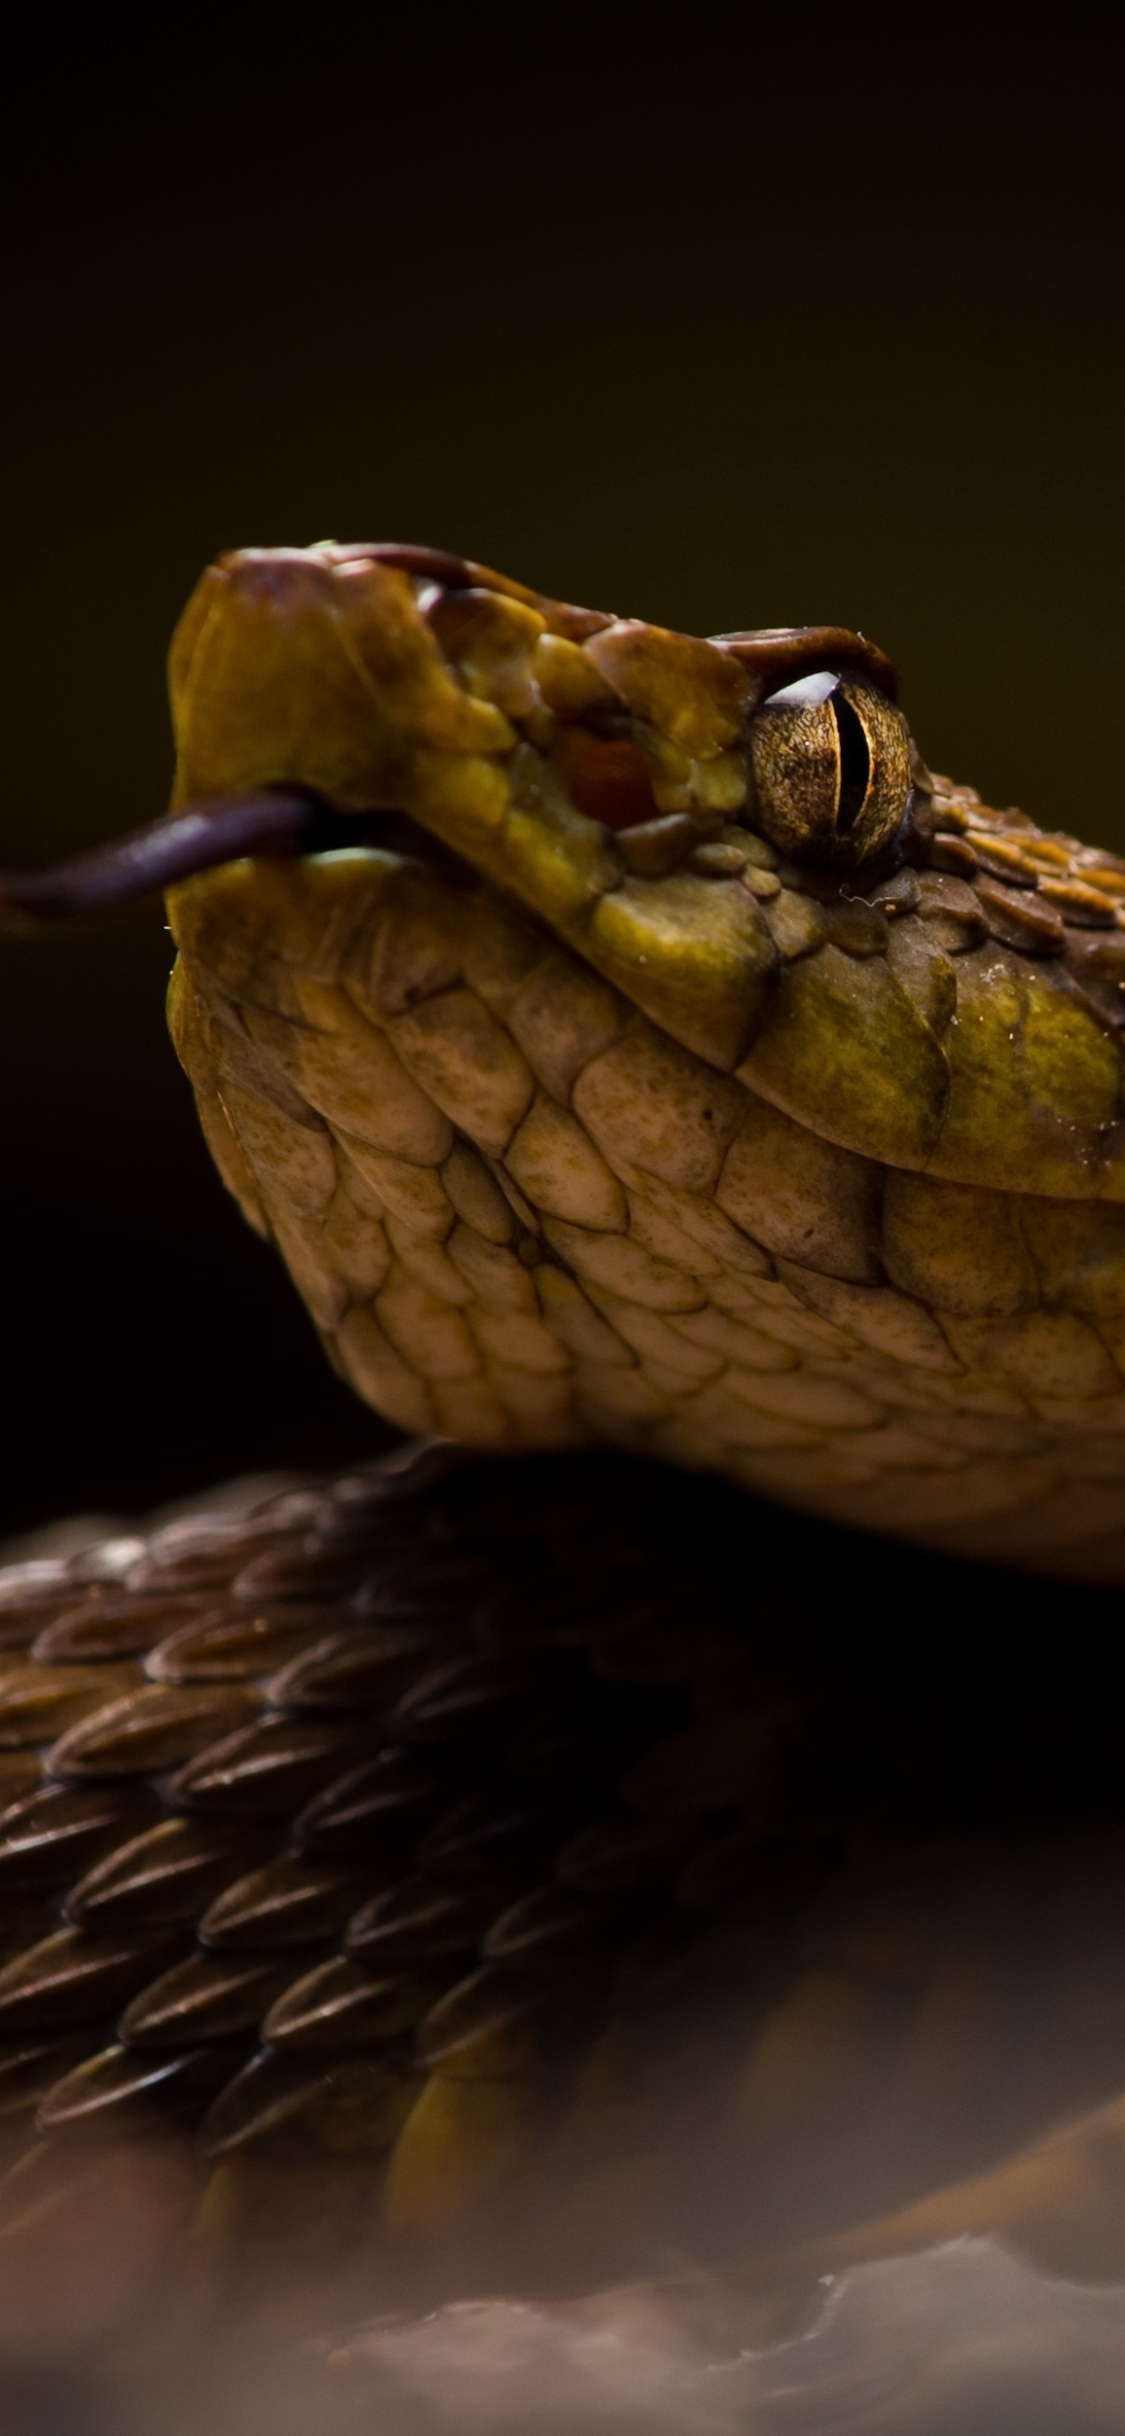 Download Pit Viper wallpaper for mobile phone, free Pit Viper HD picture